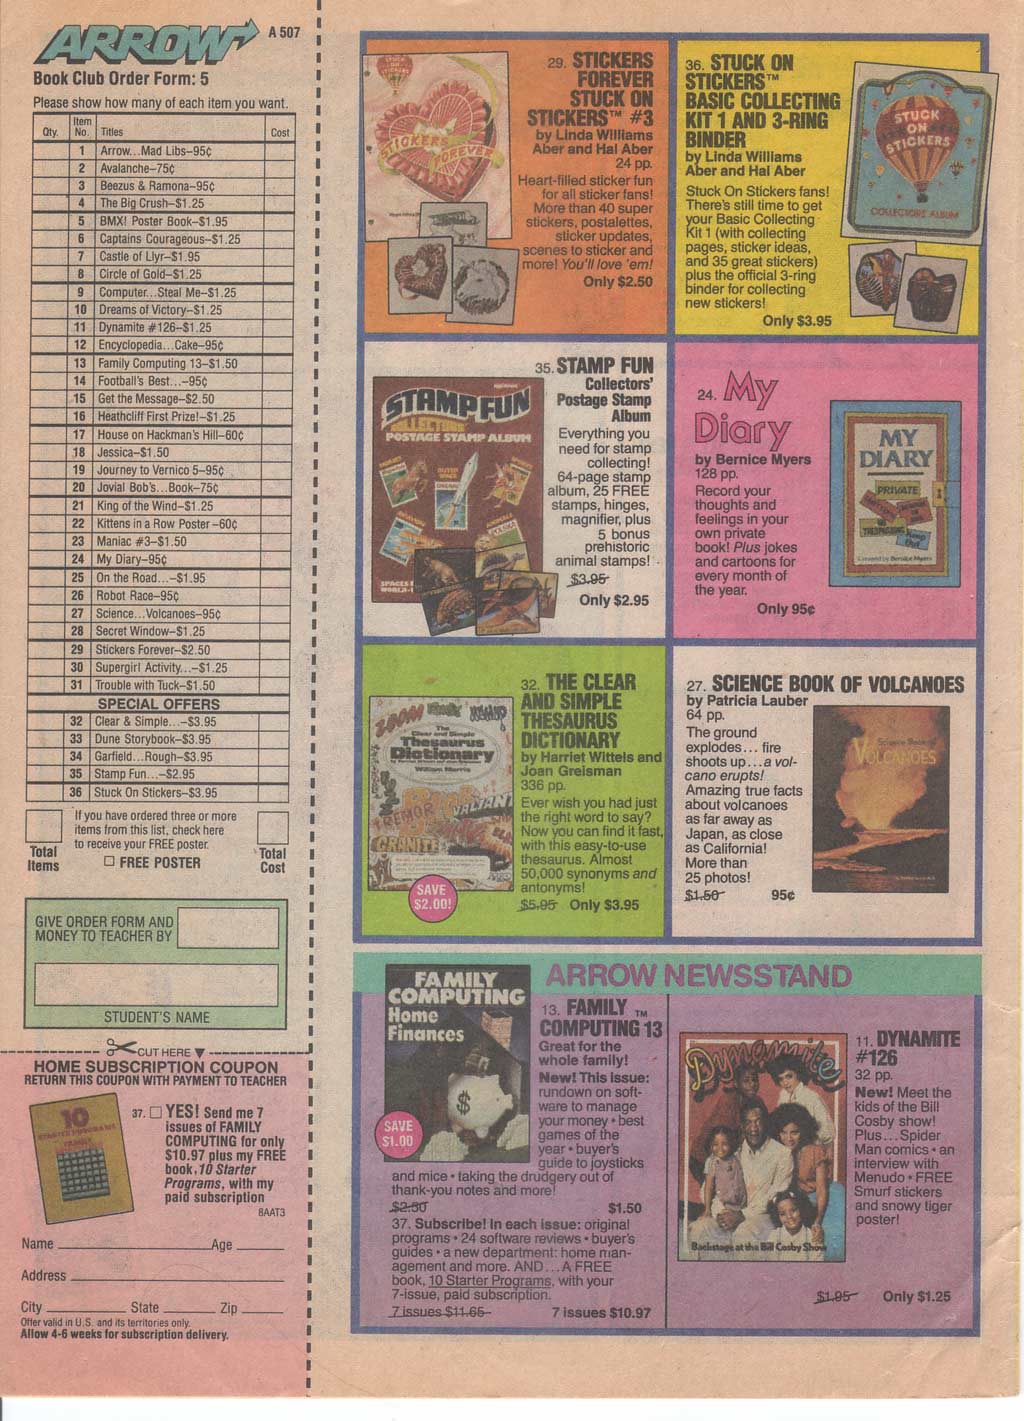 An old flyer from Scholastic Book Clubs. What books do you